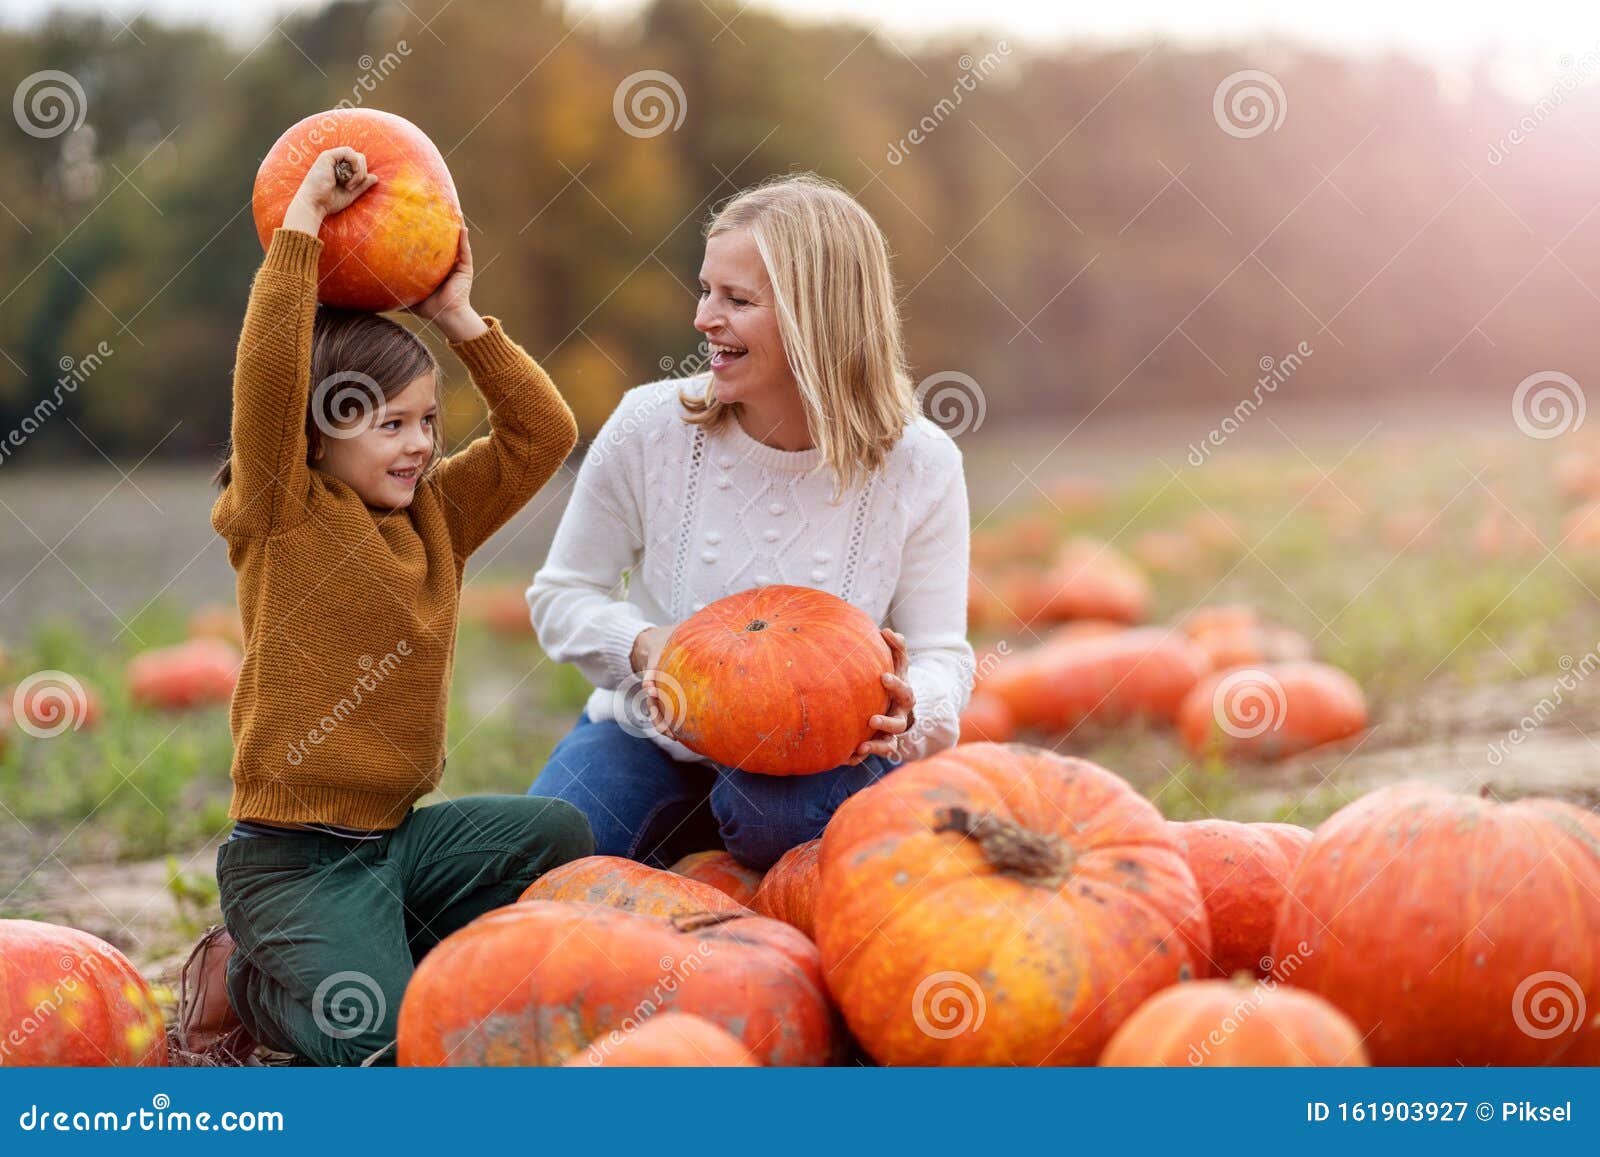 mother and son in pumpkin patch field